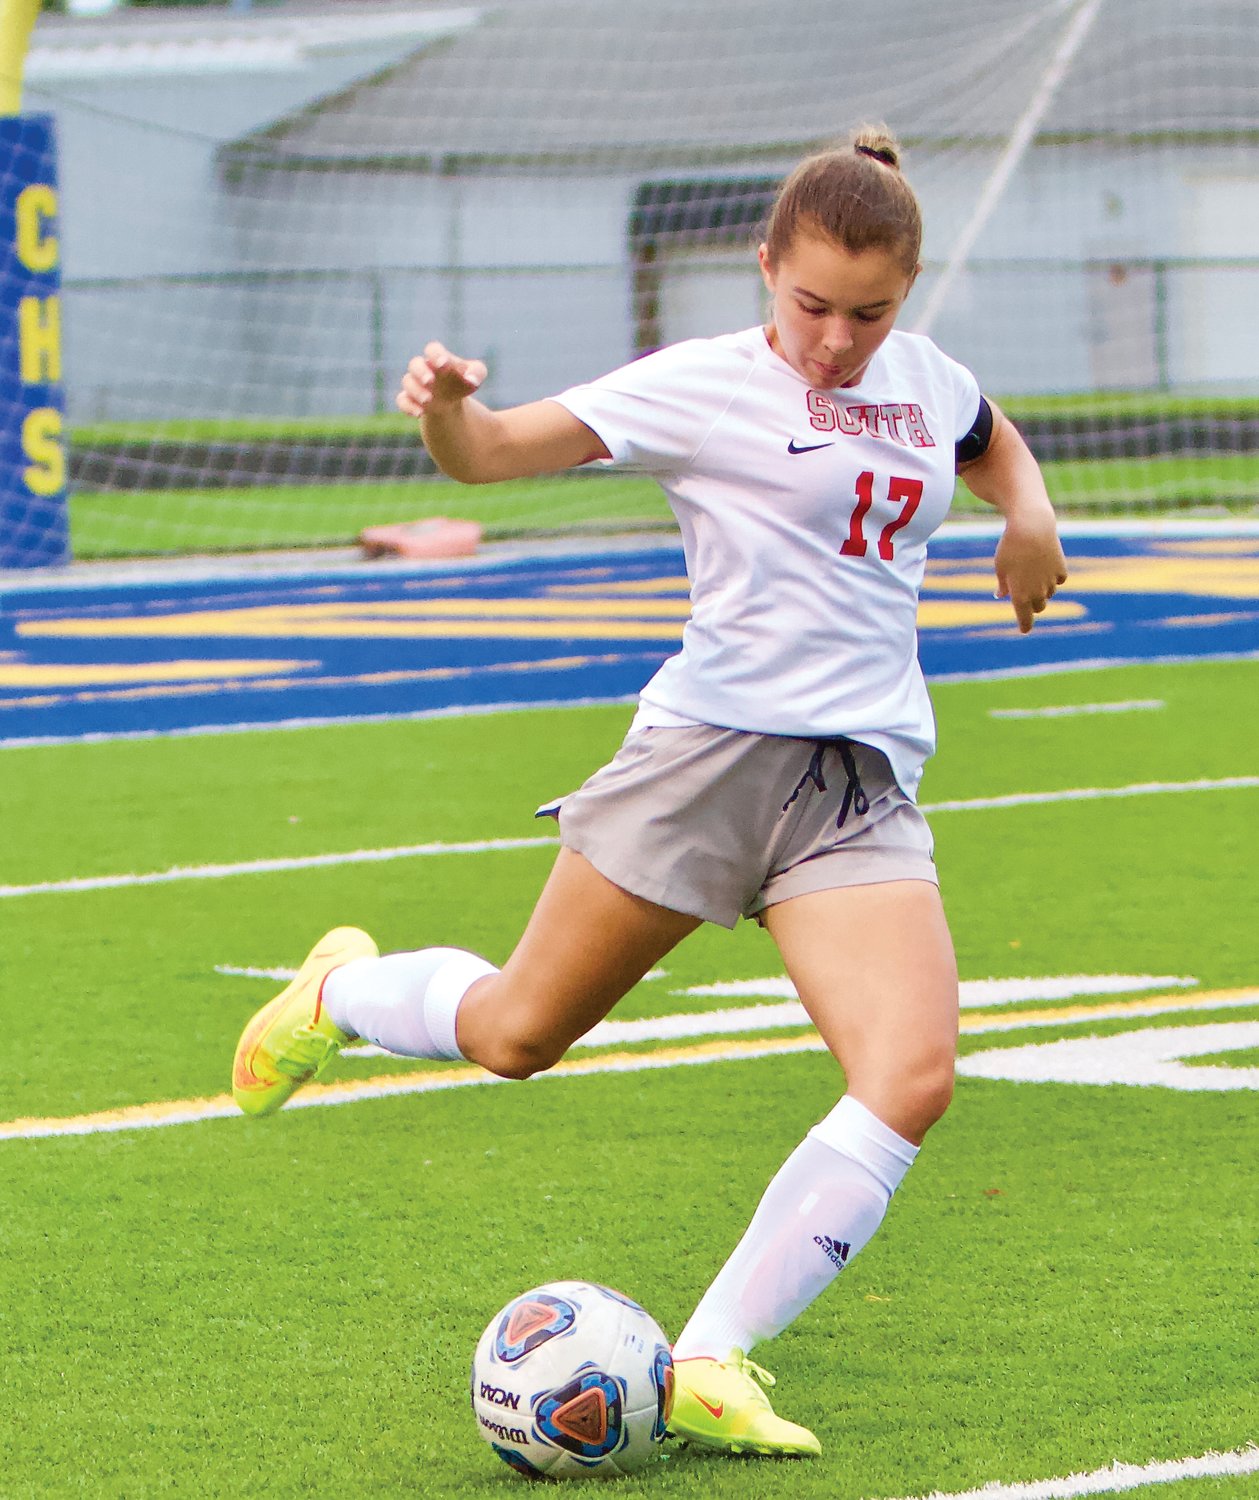 Southmont's Justine Troutman boots the ball down field.